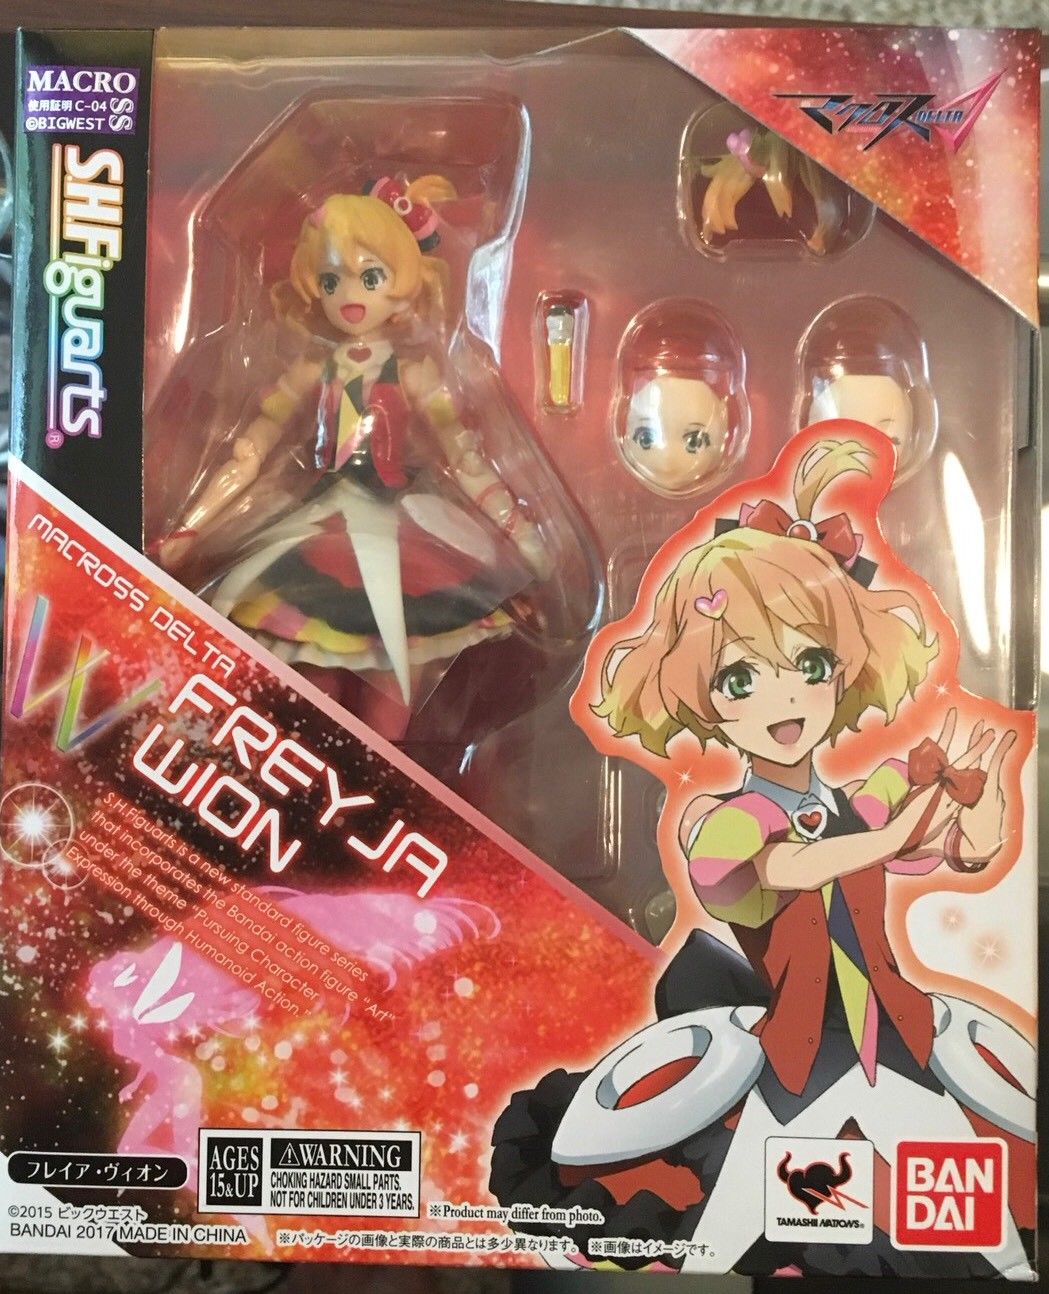 S.H.Figuarts Macross Delta FREYJA WION Action Figure BANDAI NEW from Japan F/S